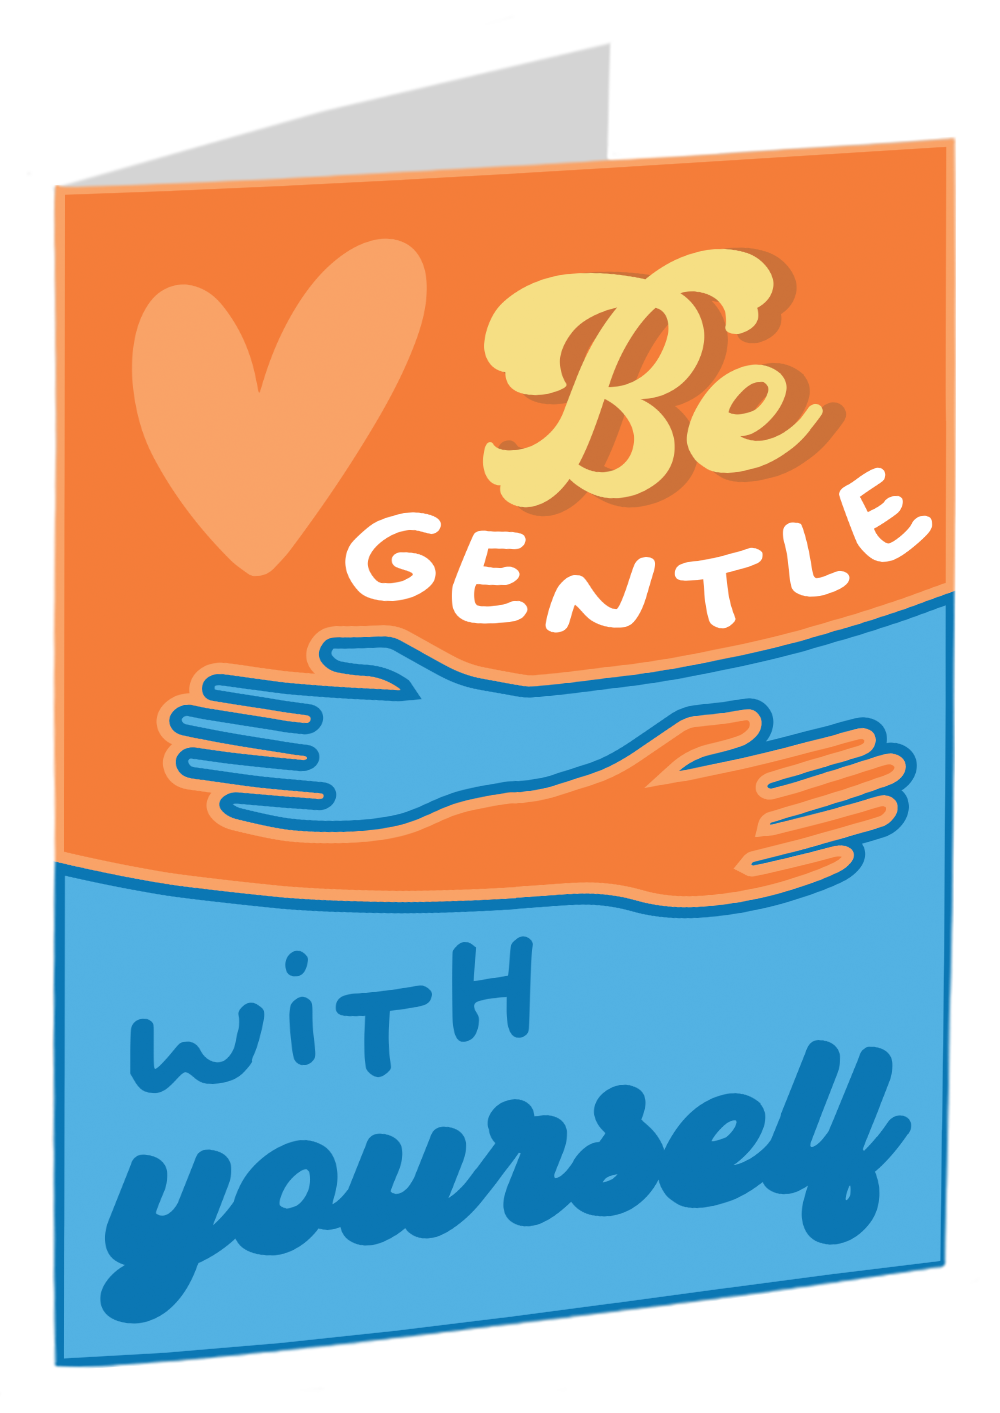 "Be Gentle With Yourself" - A Card To Help People With Depression Fight Self-Criticism